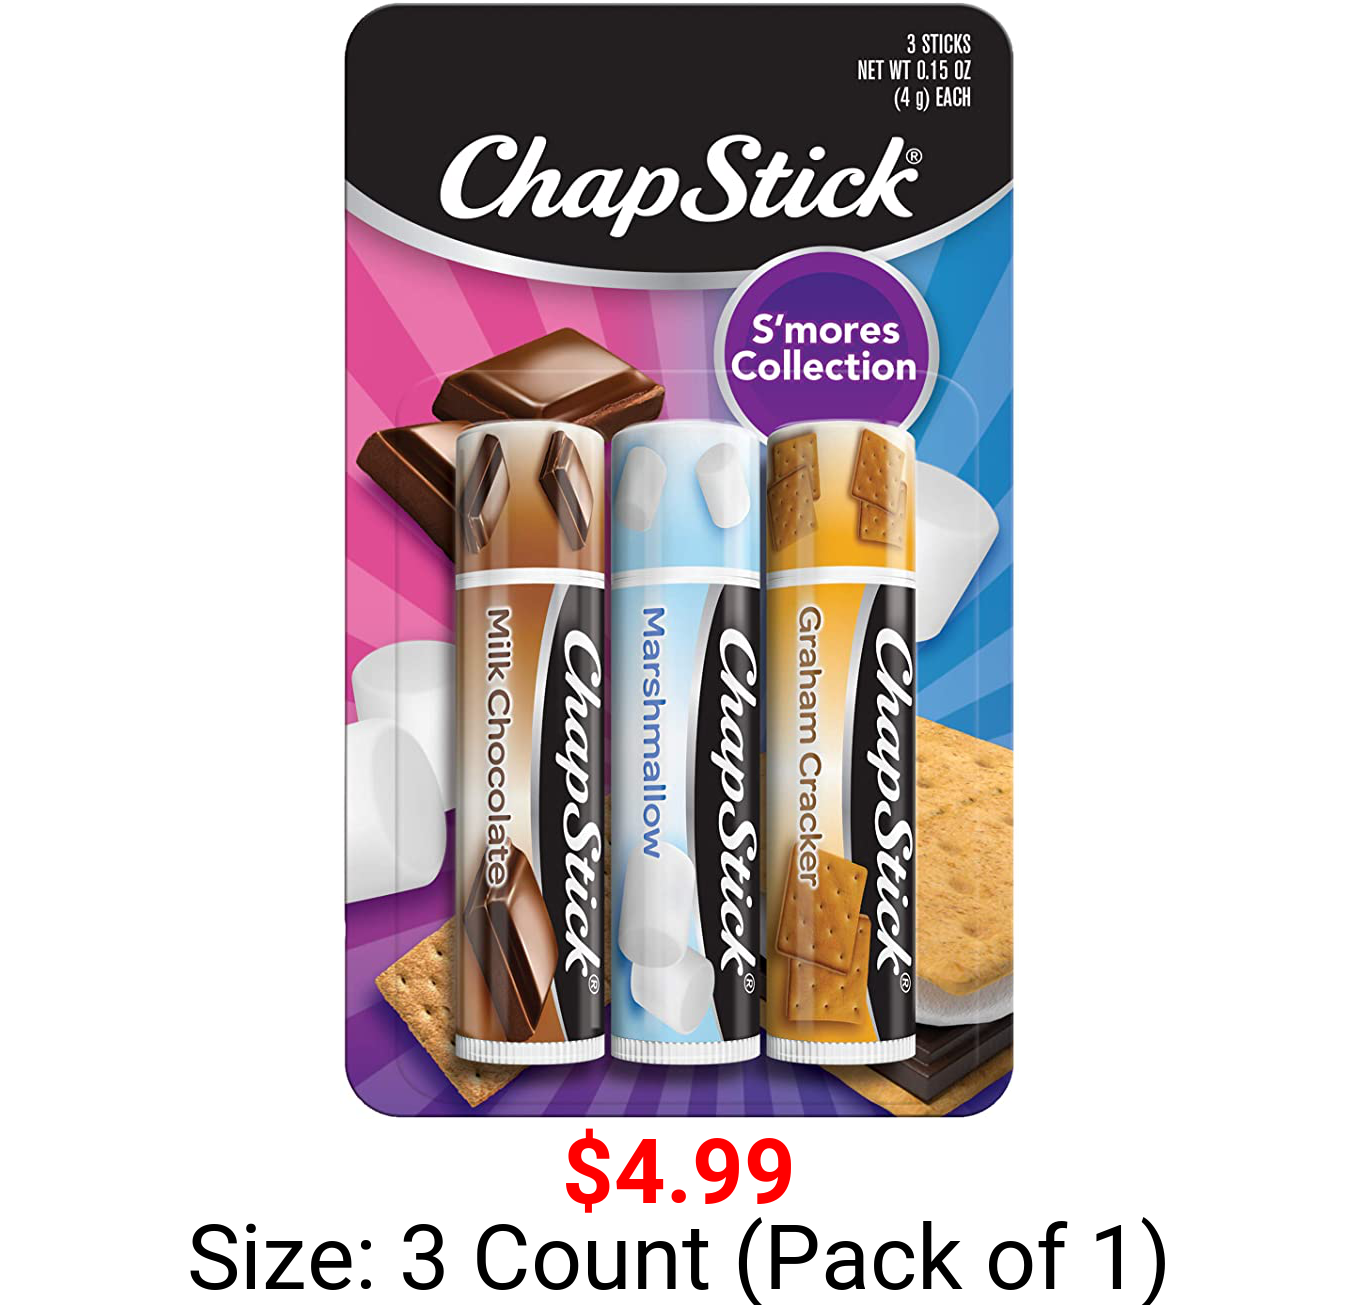 ChapStick S'mores Collection Graham Cracker, Marshmallow and Milk Chocolate Flavored Lip Balm Tubes Variety Pack, Lip Care - 0.15 Oz (Pack of 3)